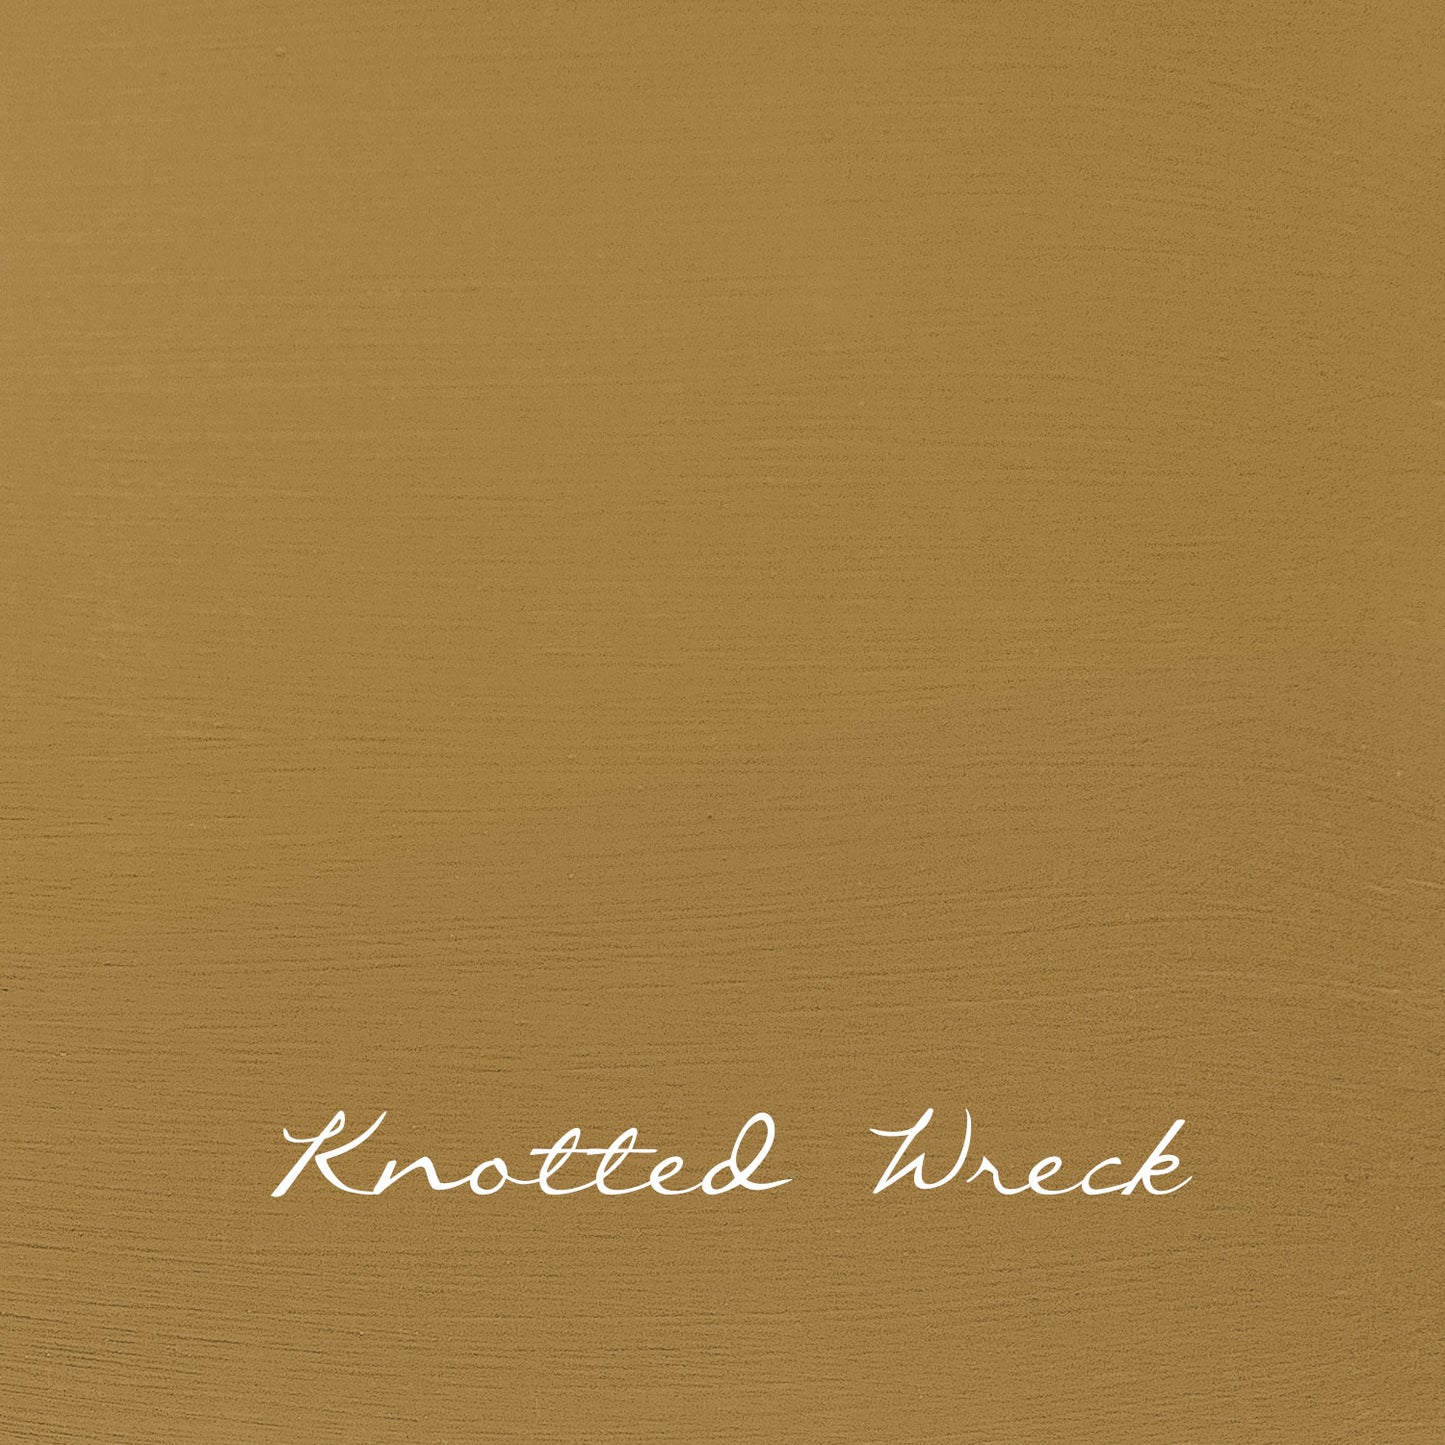 Knotted Wreck - Vintage